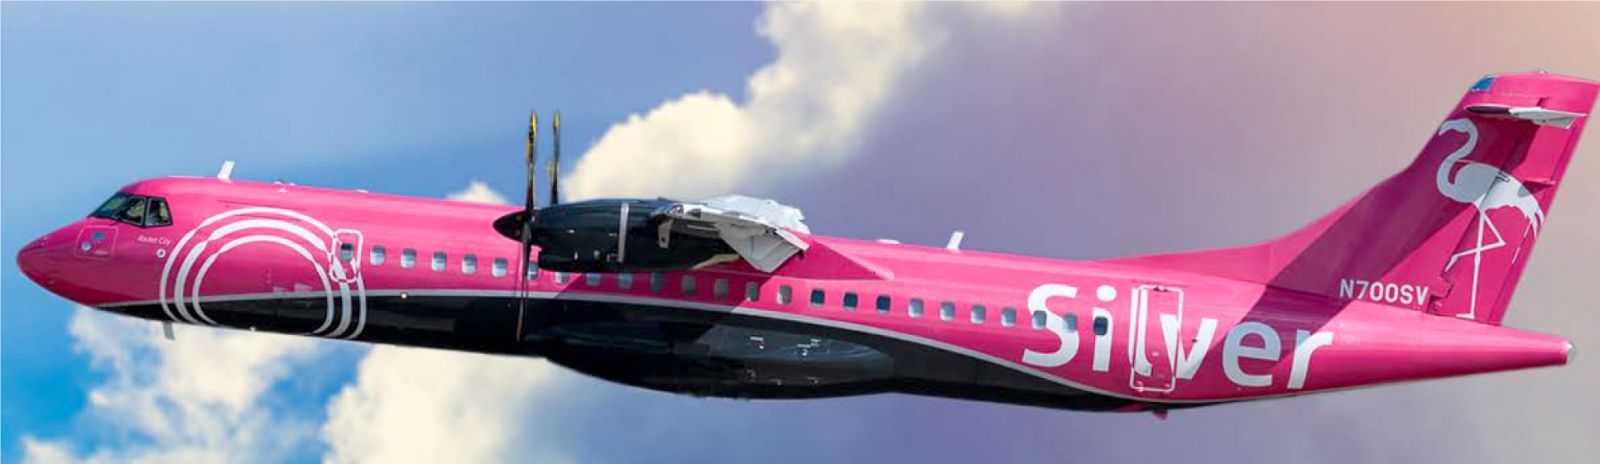 Silver Airways is returning to Charleston with nonstop flights to Orlando, Fort Lauderdale and Tampa, Fla. The airline previously offered flights out of Charleston in 2015. (Photo/Silver Airways)